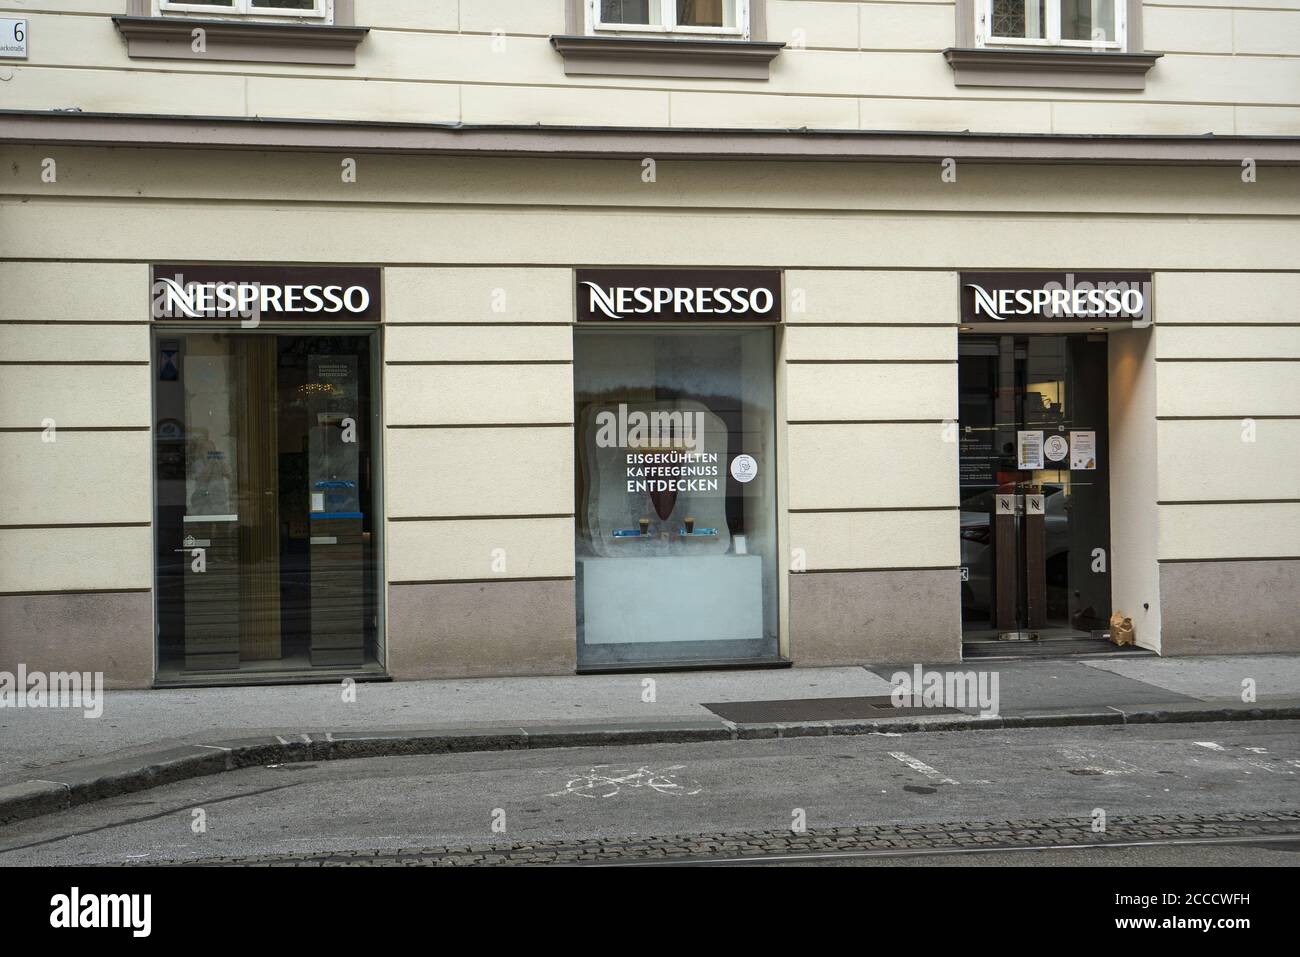 Nespresso Coffee Shop High Resolution Stock Photography and Images - Alamy